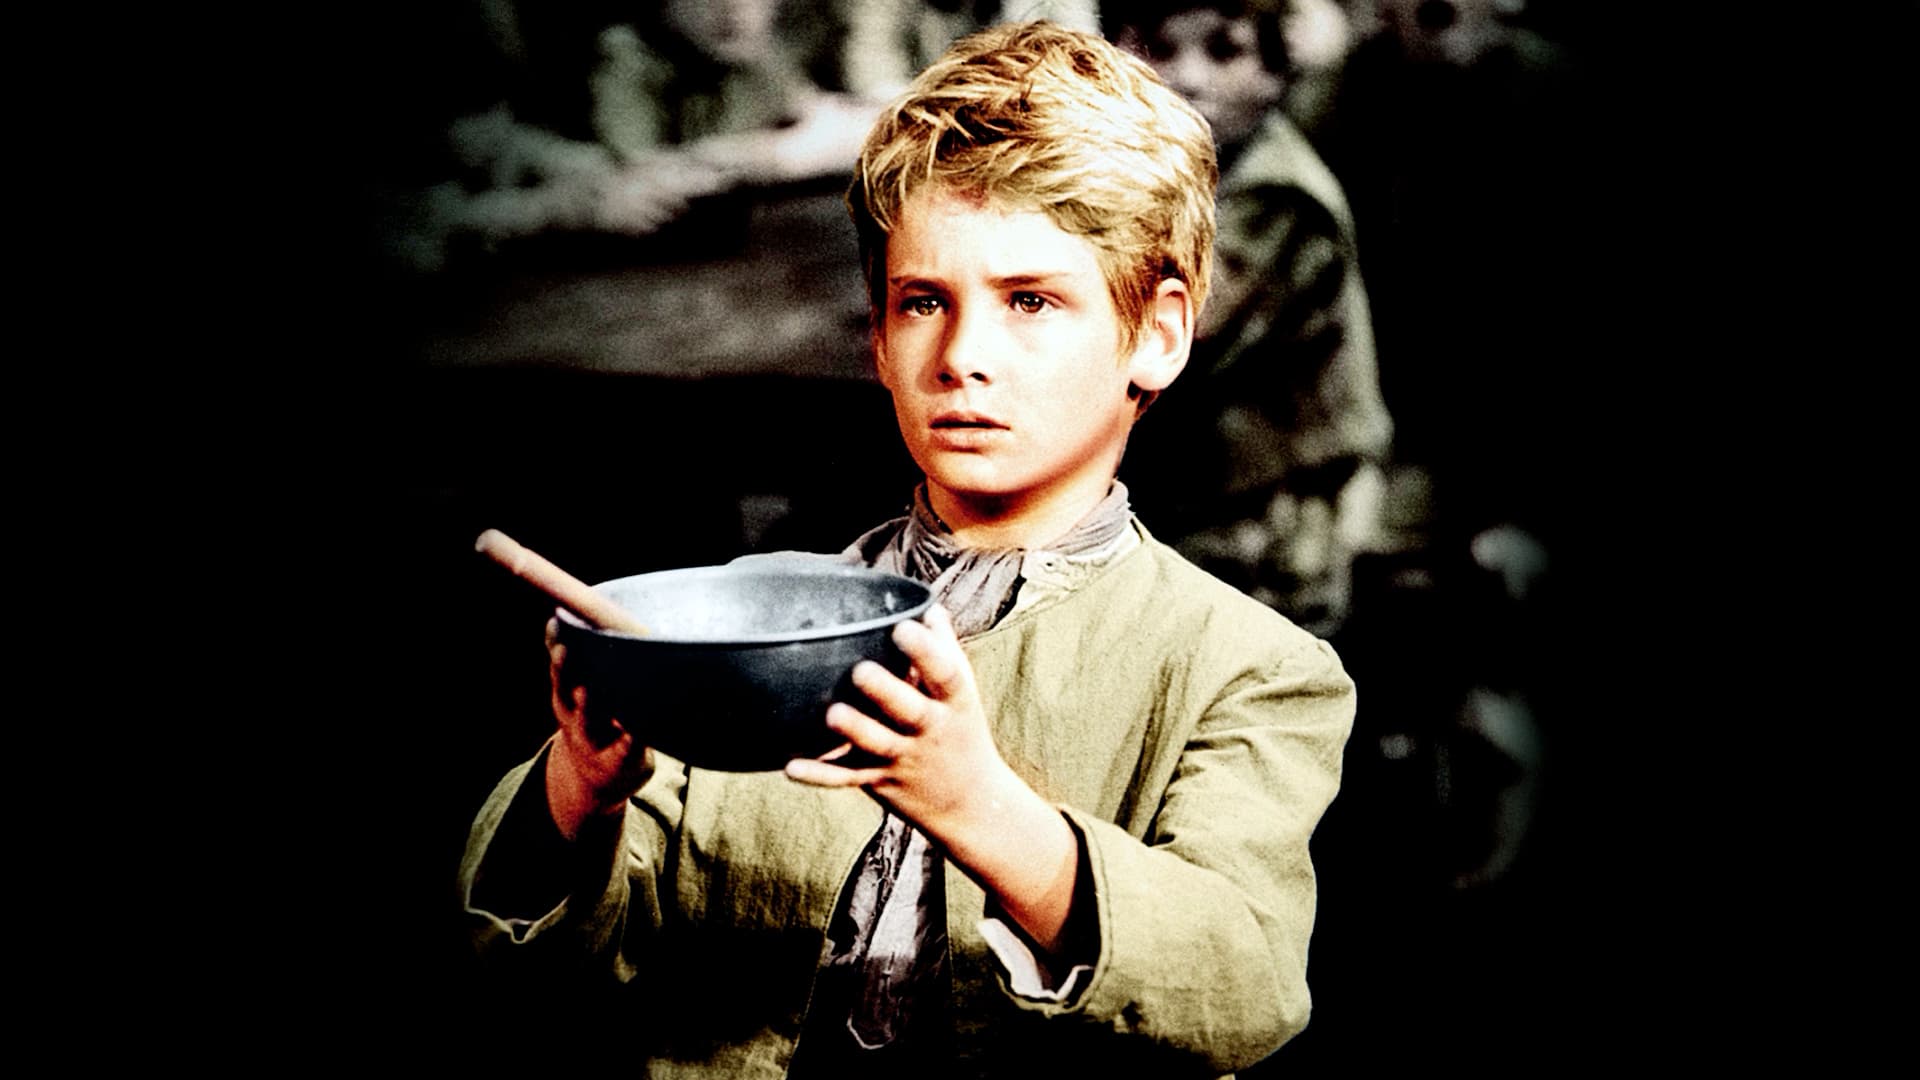 Oliver Twist Wallpapers High Quality | Download Free